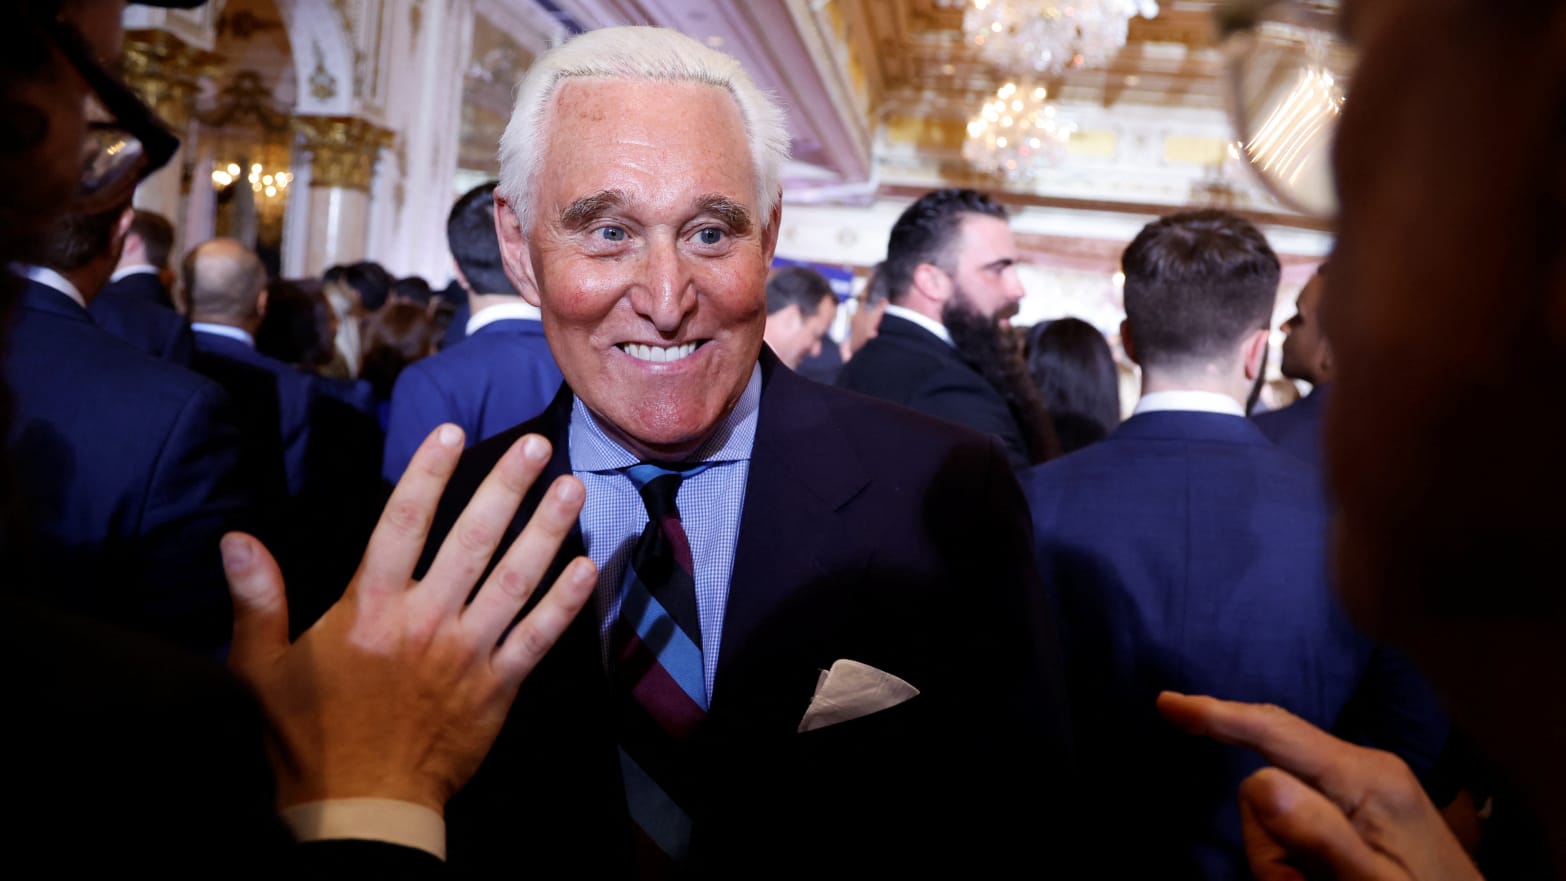 Roger Stone at Mar-a-Lago.